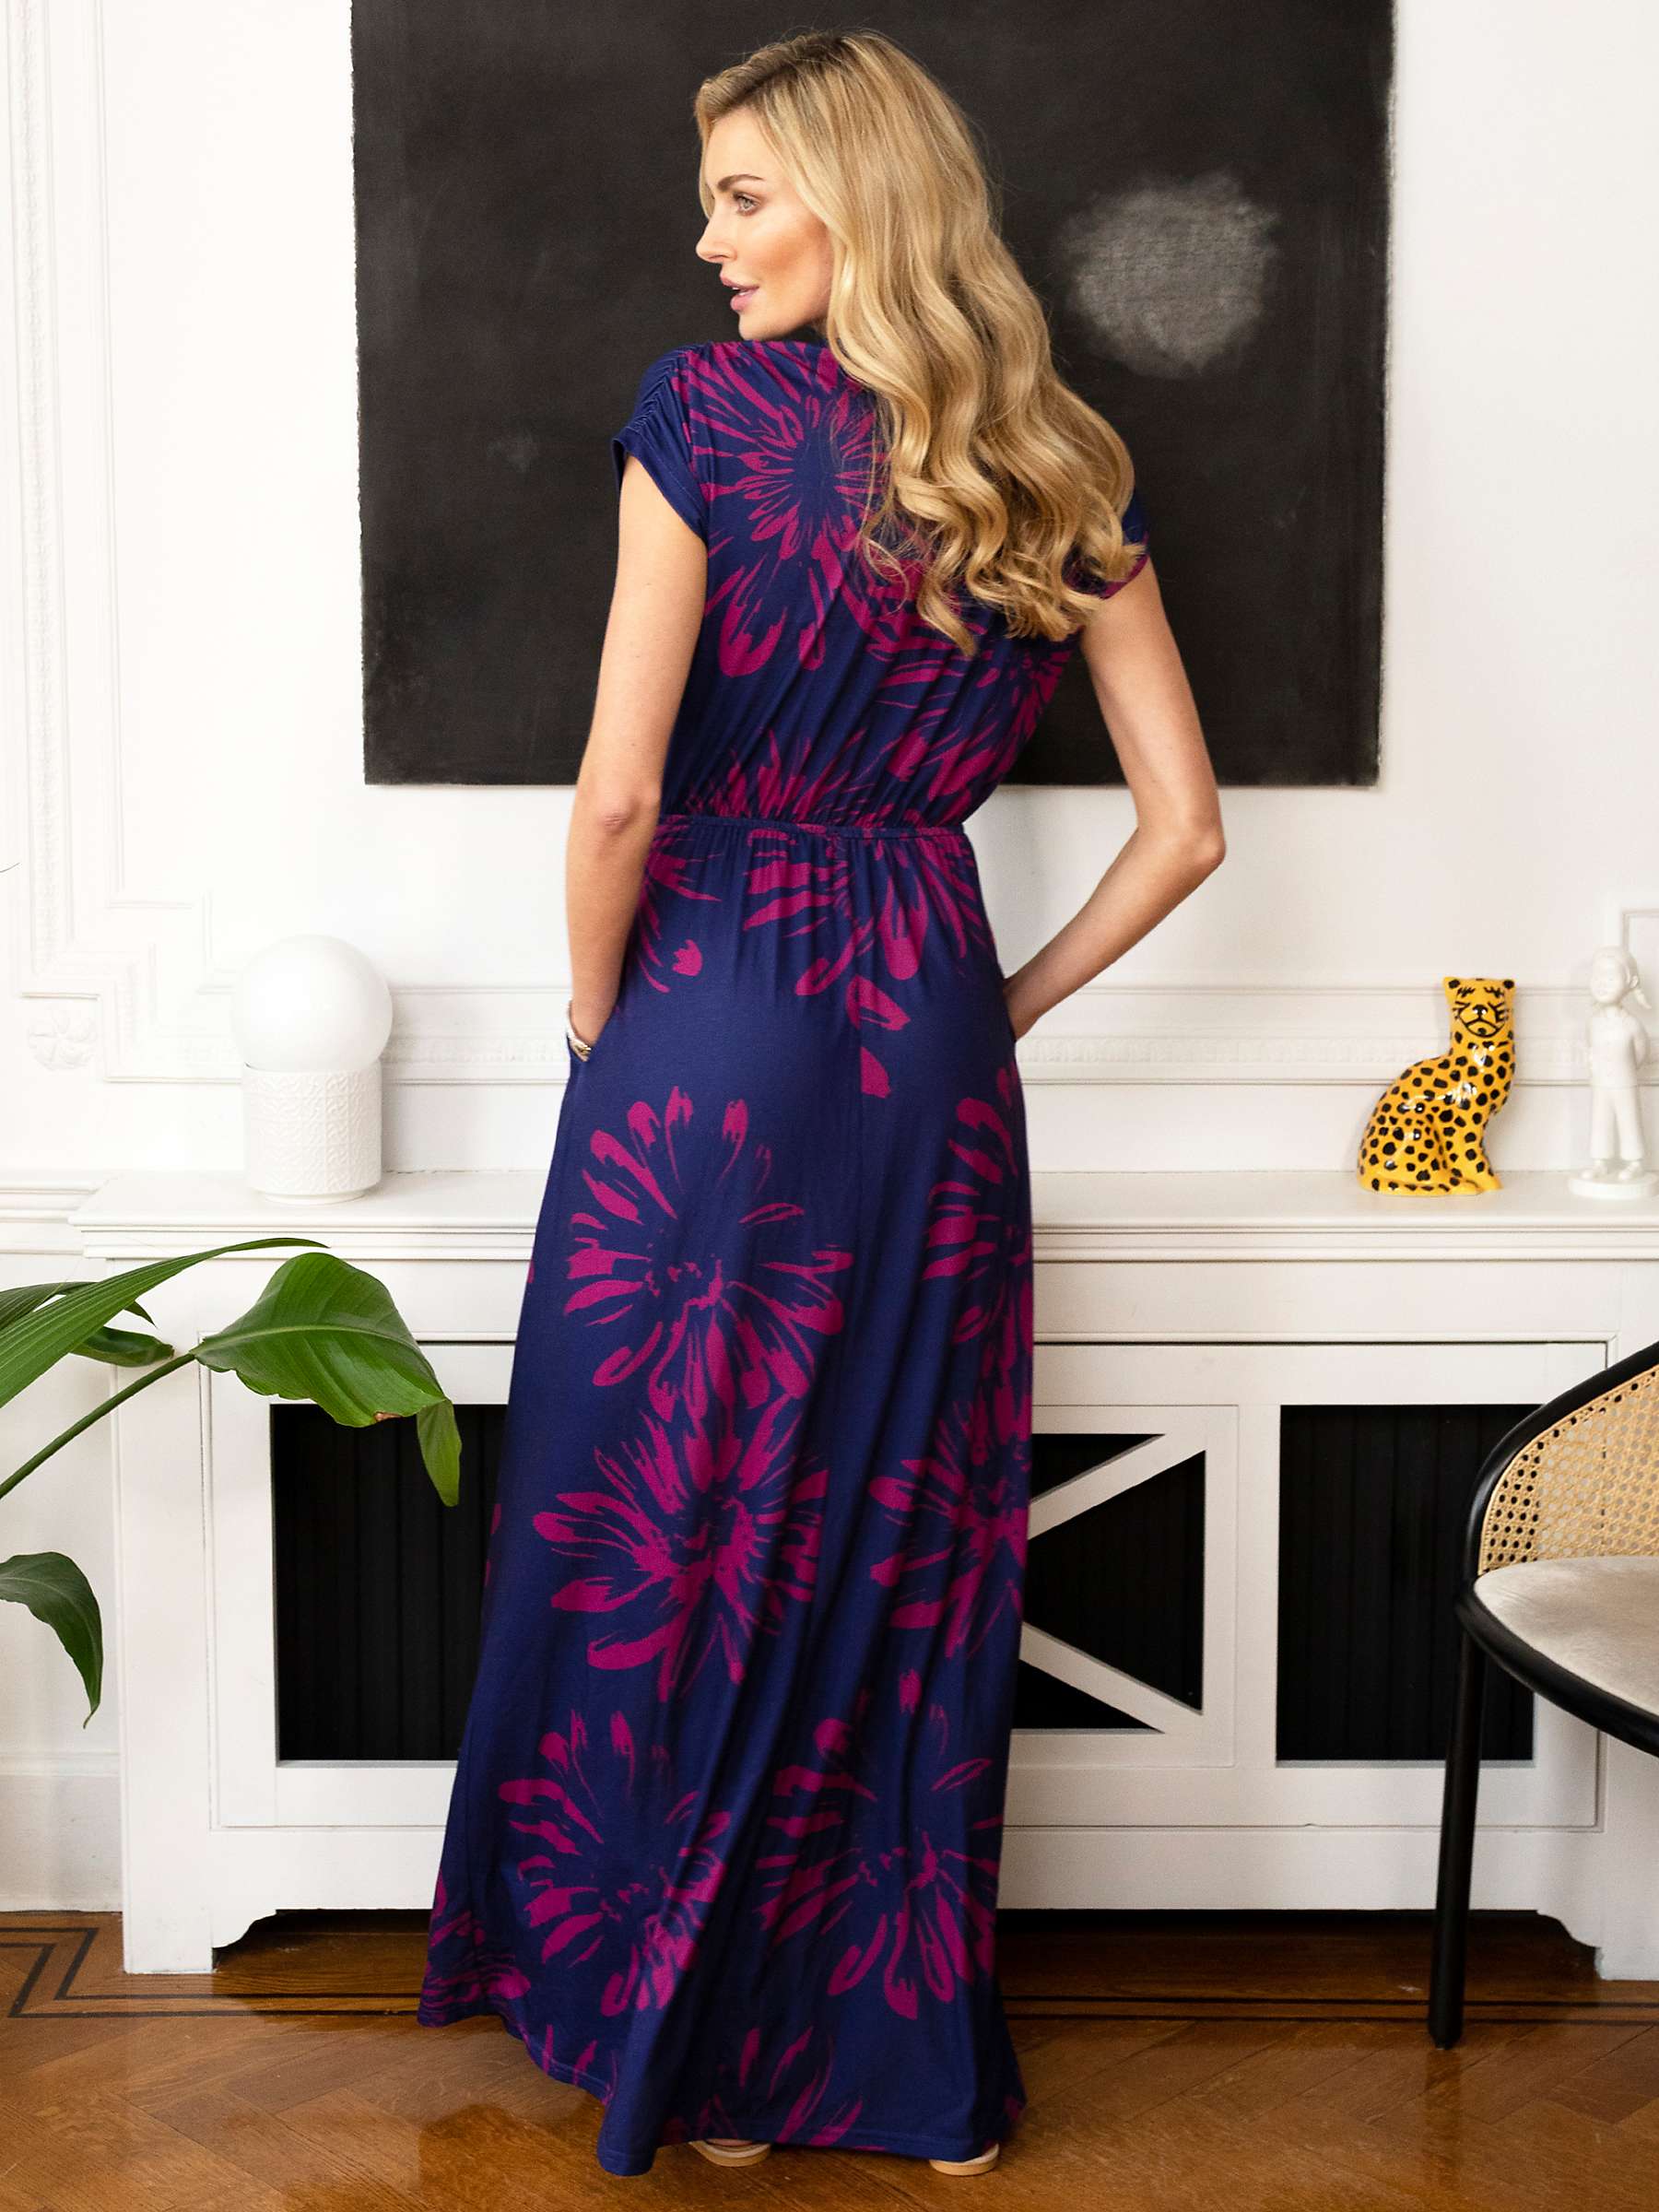 Buy HotSquash Iconic Floral Maxi Dress, Navy/Pink Online at johnlewis.com